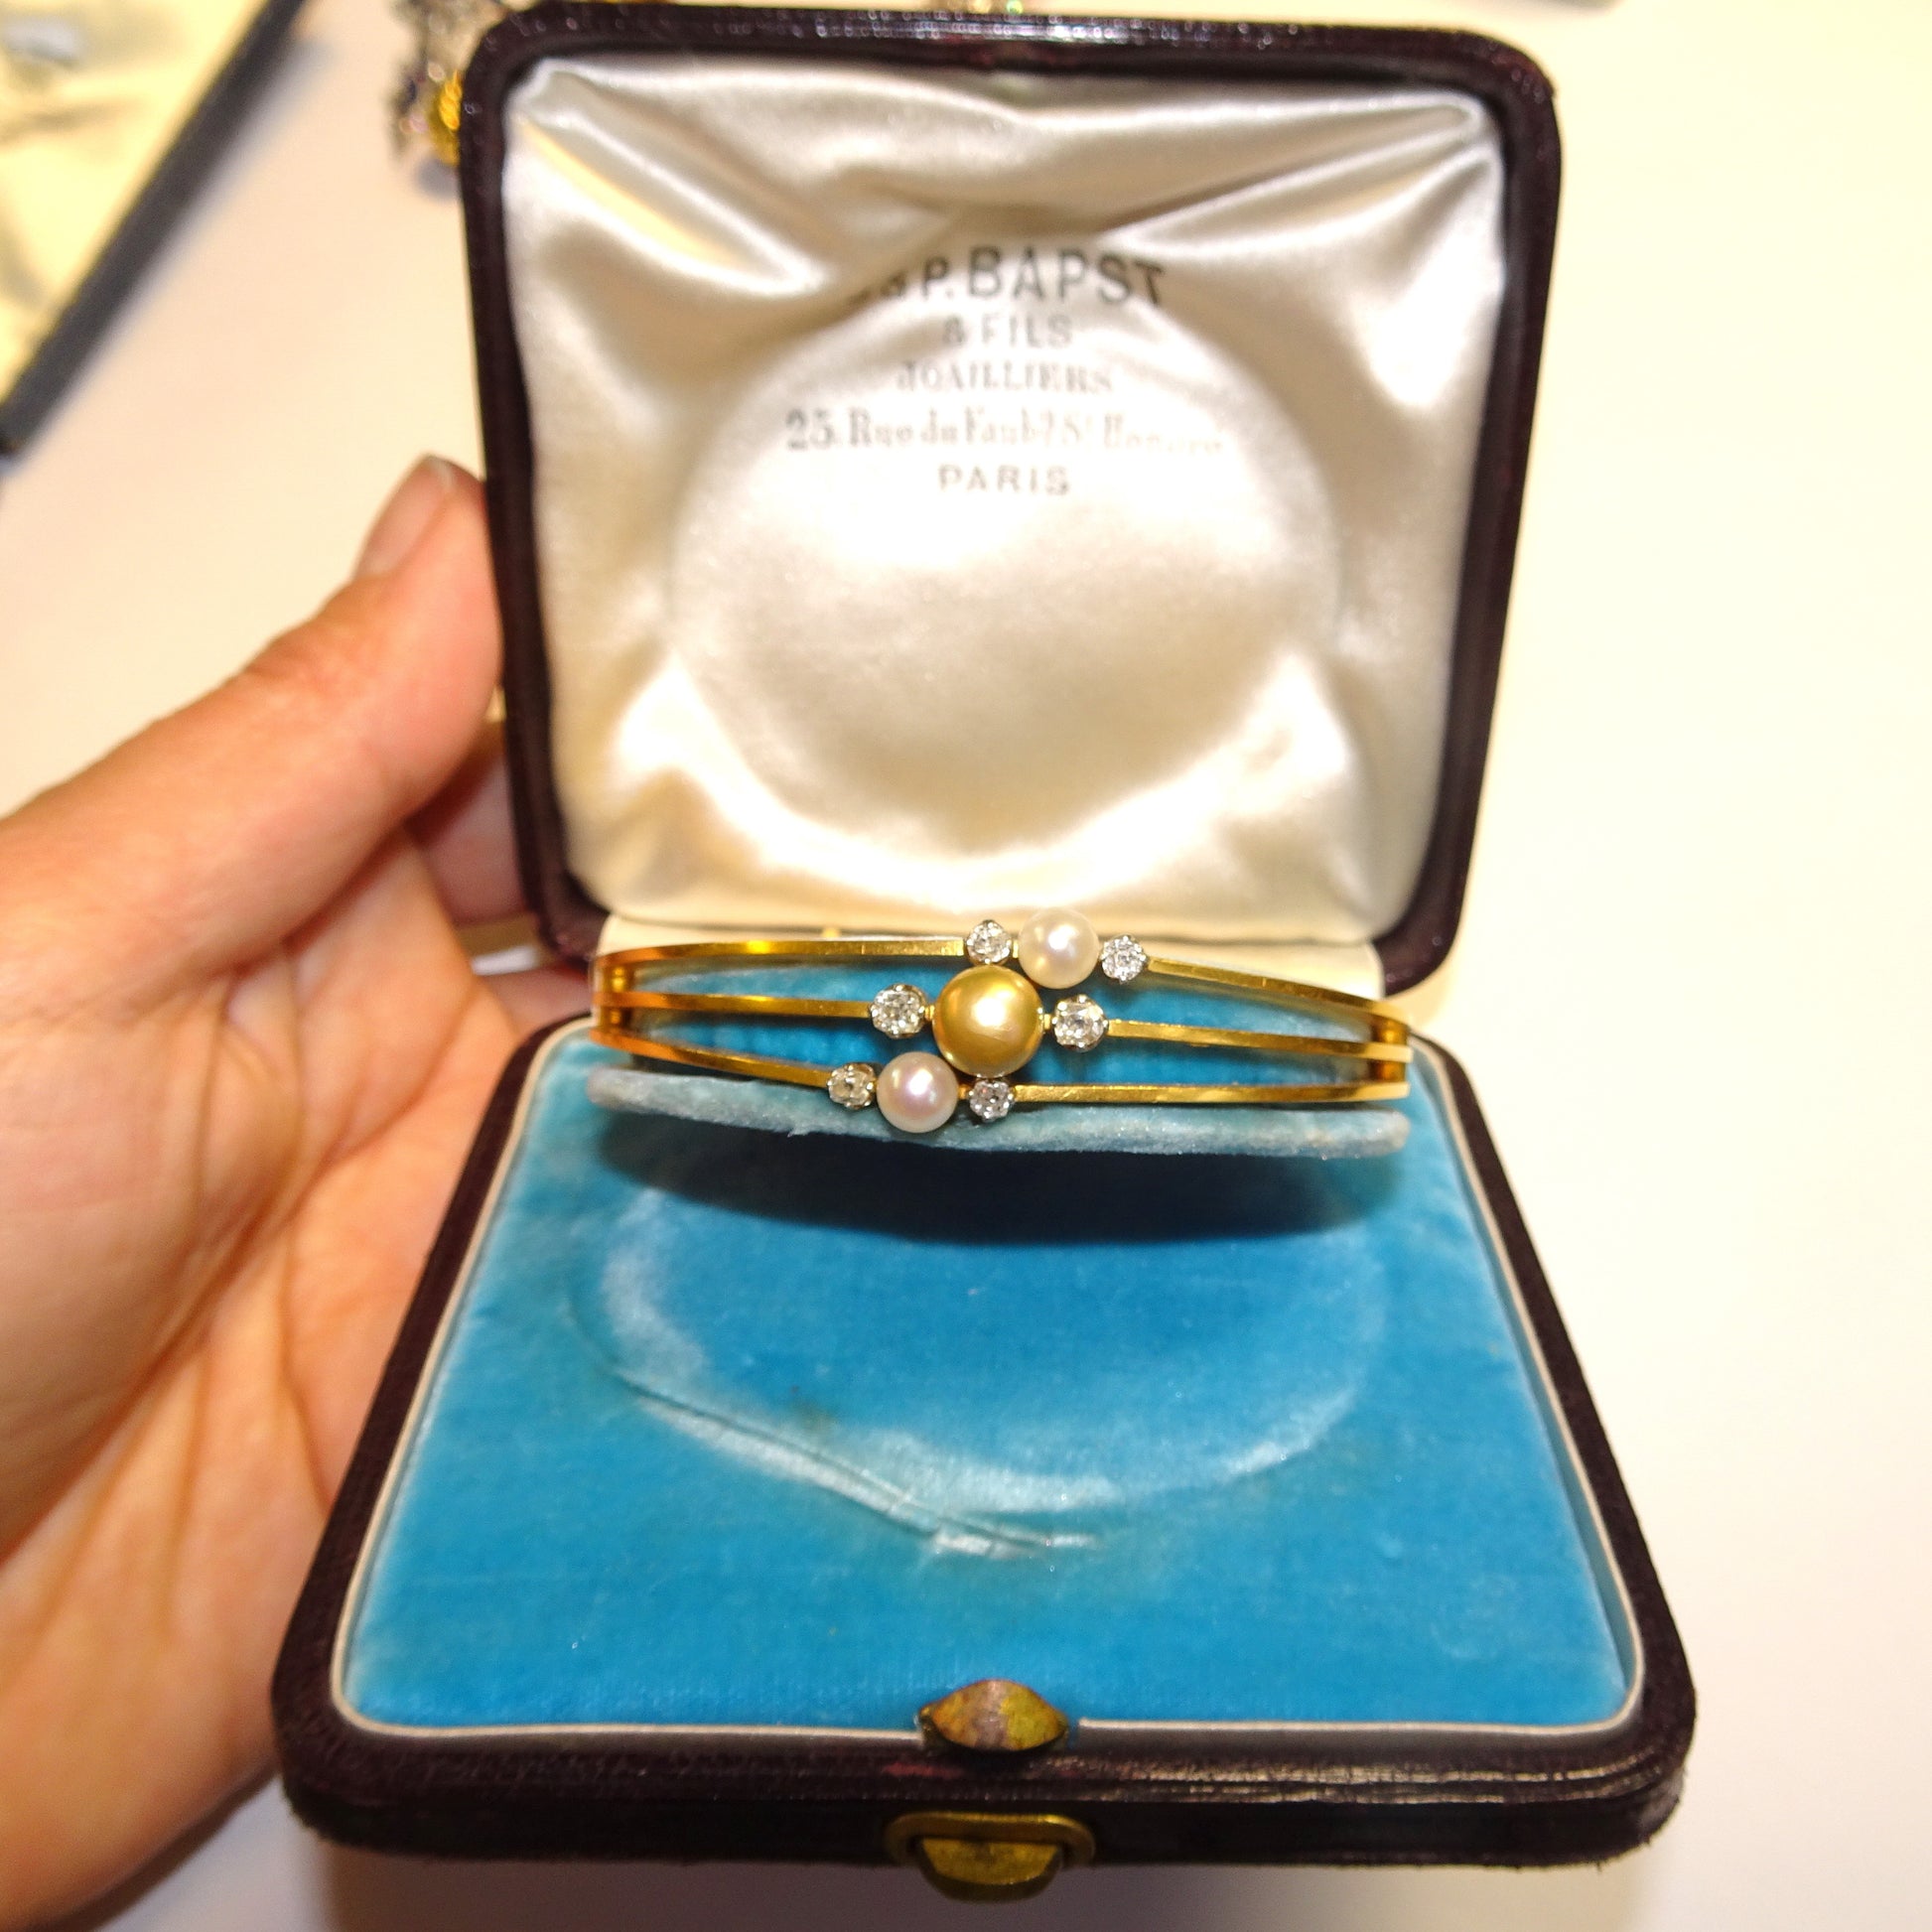 Bapst & Falize Paris Antique 18KT Yellow Gold Natural Pearl Bangle Bracelet in jewelry box